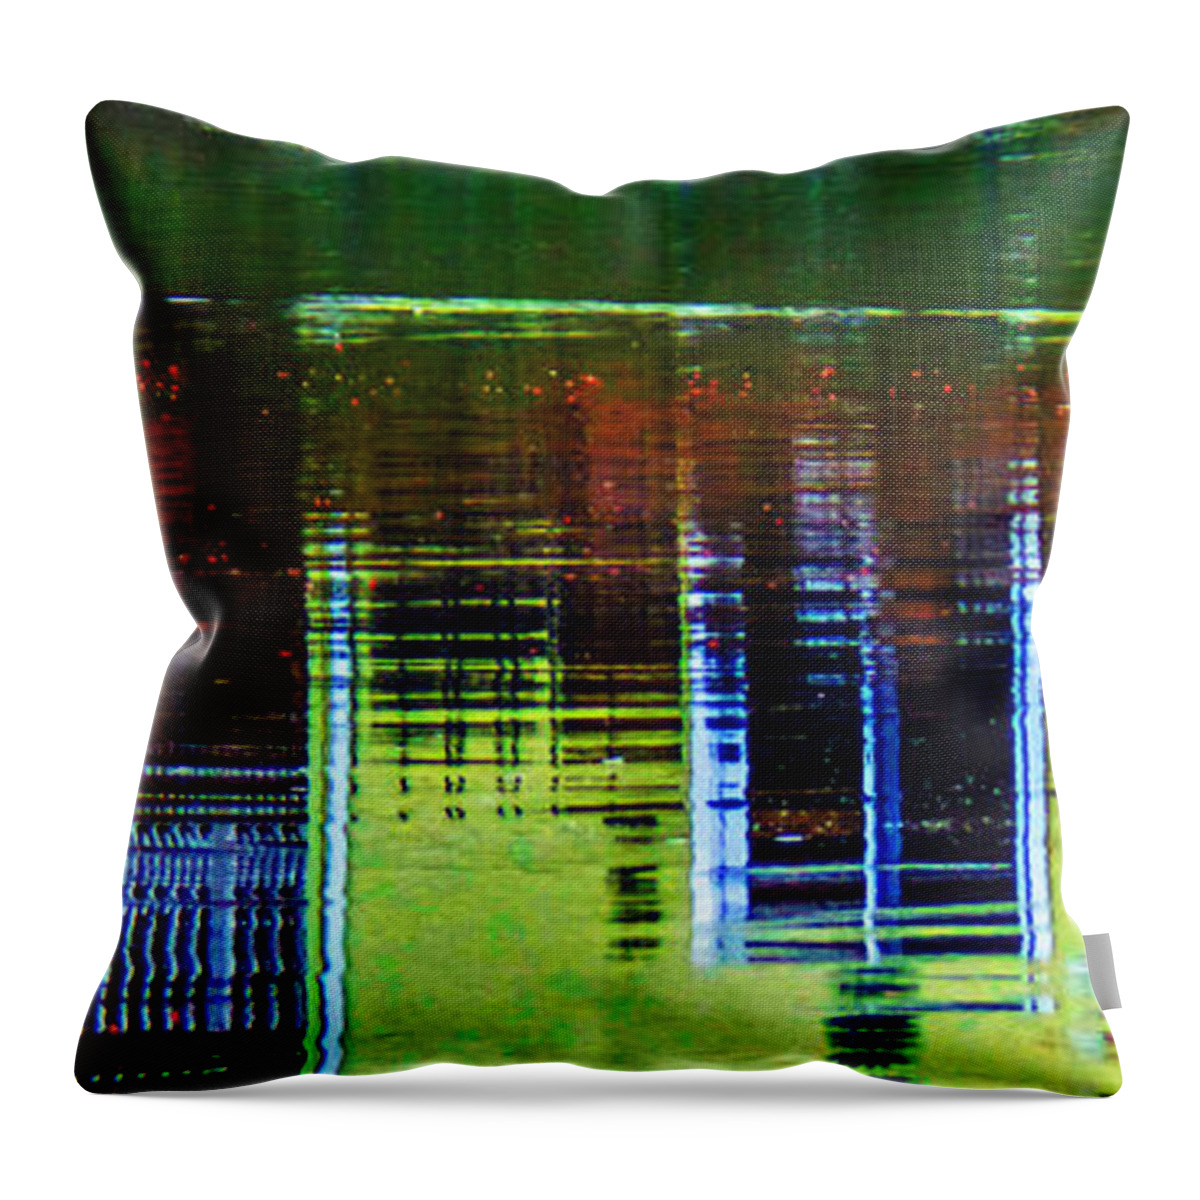 New England Throw Pillow featuring the photograph New England Landscape Illusion by Charlie Cliques